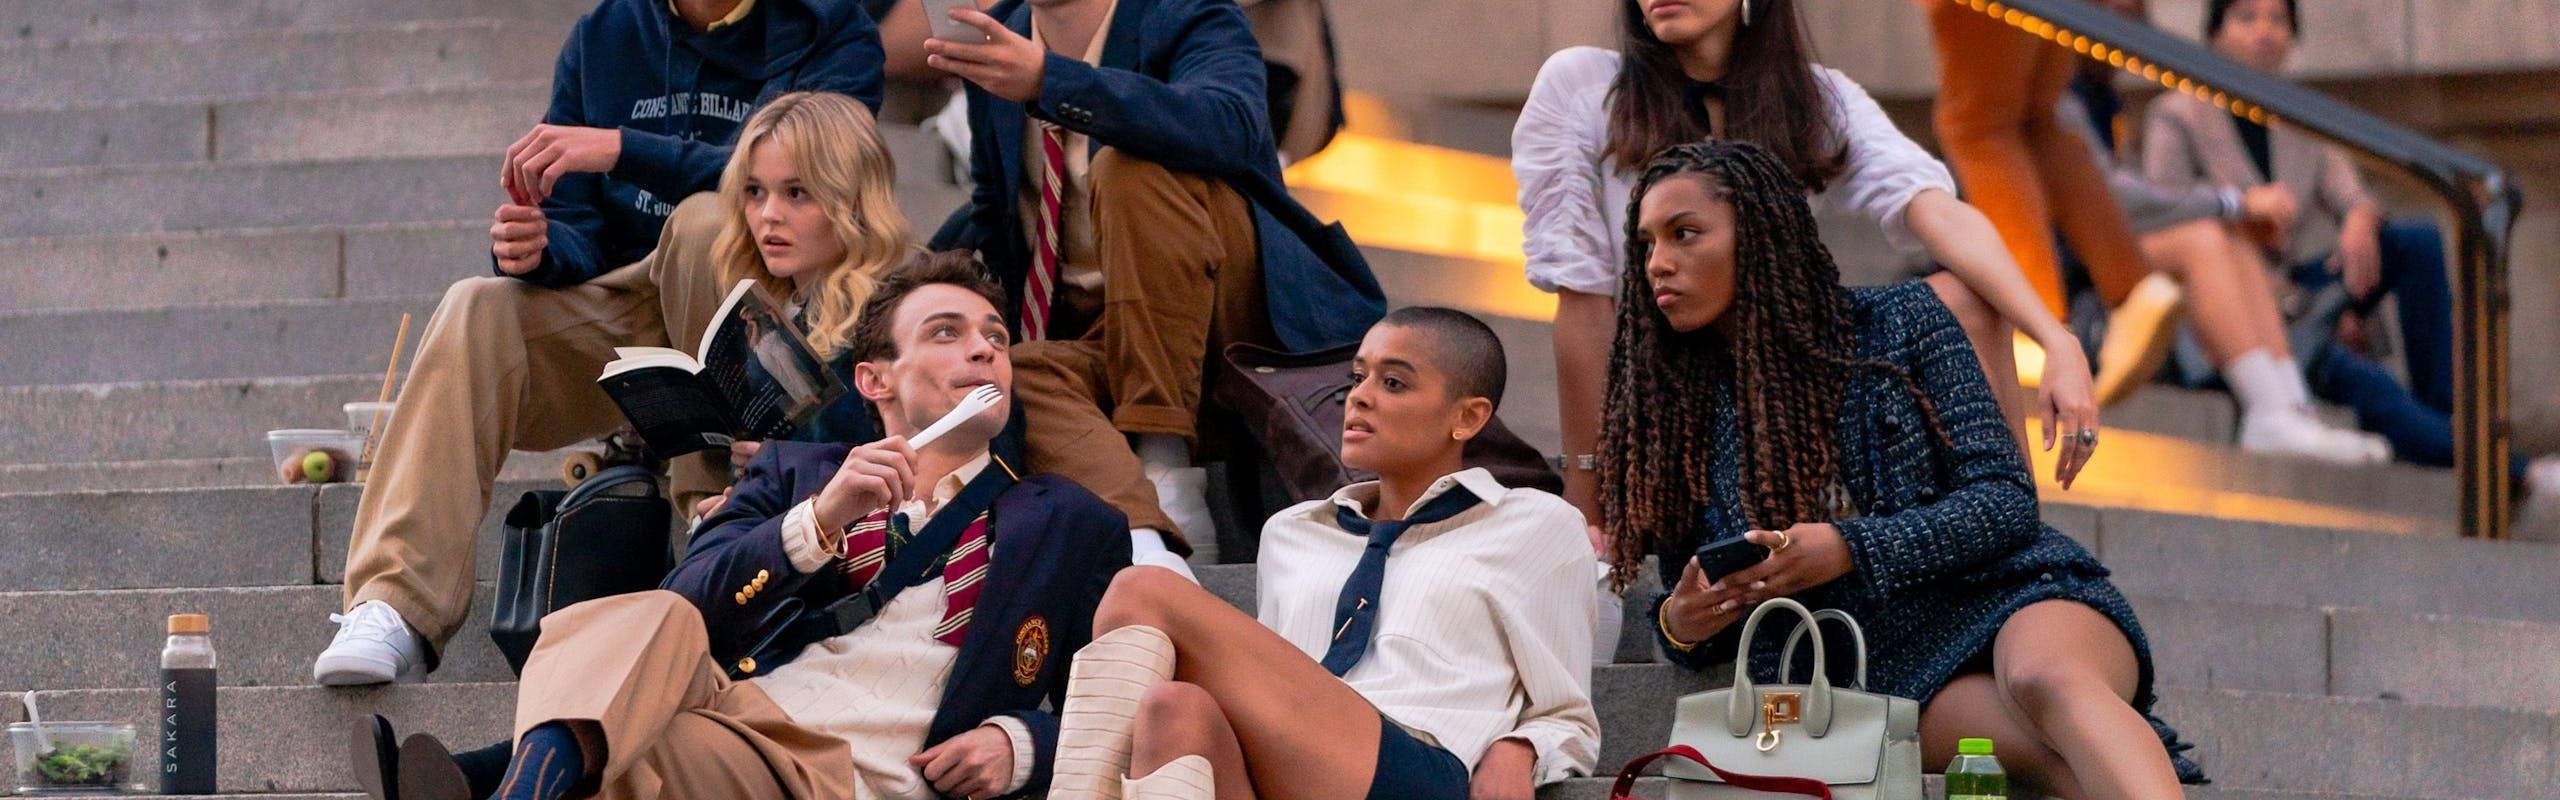 The cast of the Gossip Girl reboot sits on The Met steps.